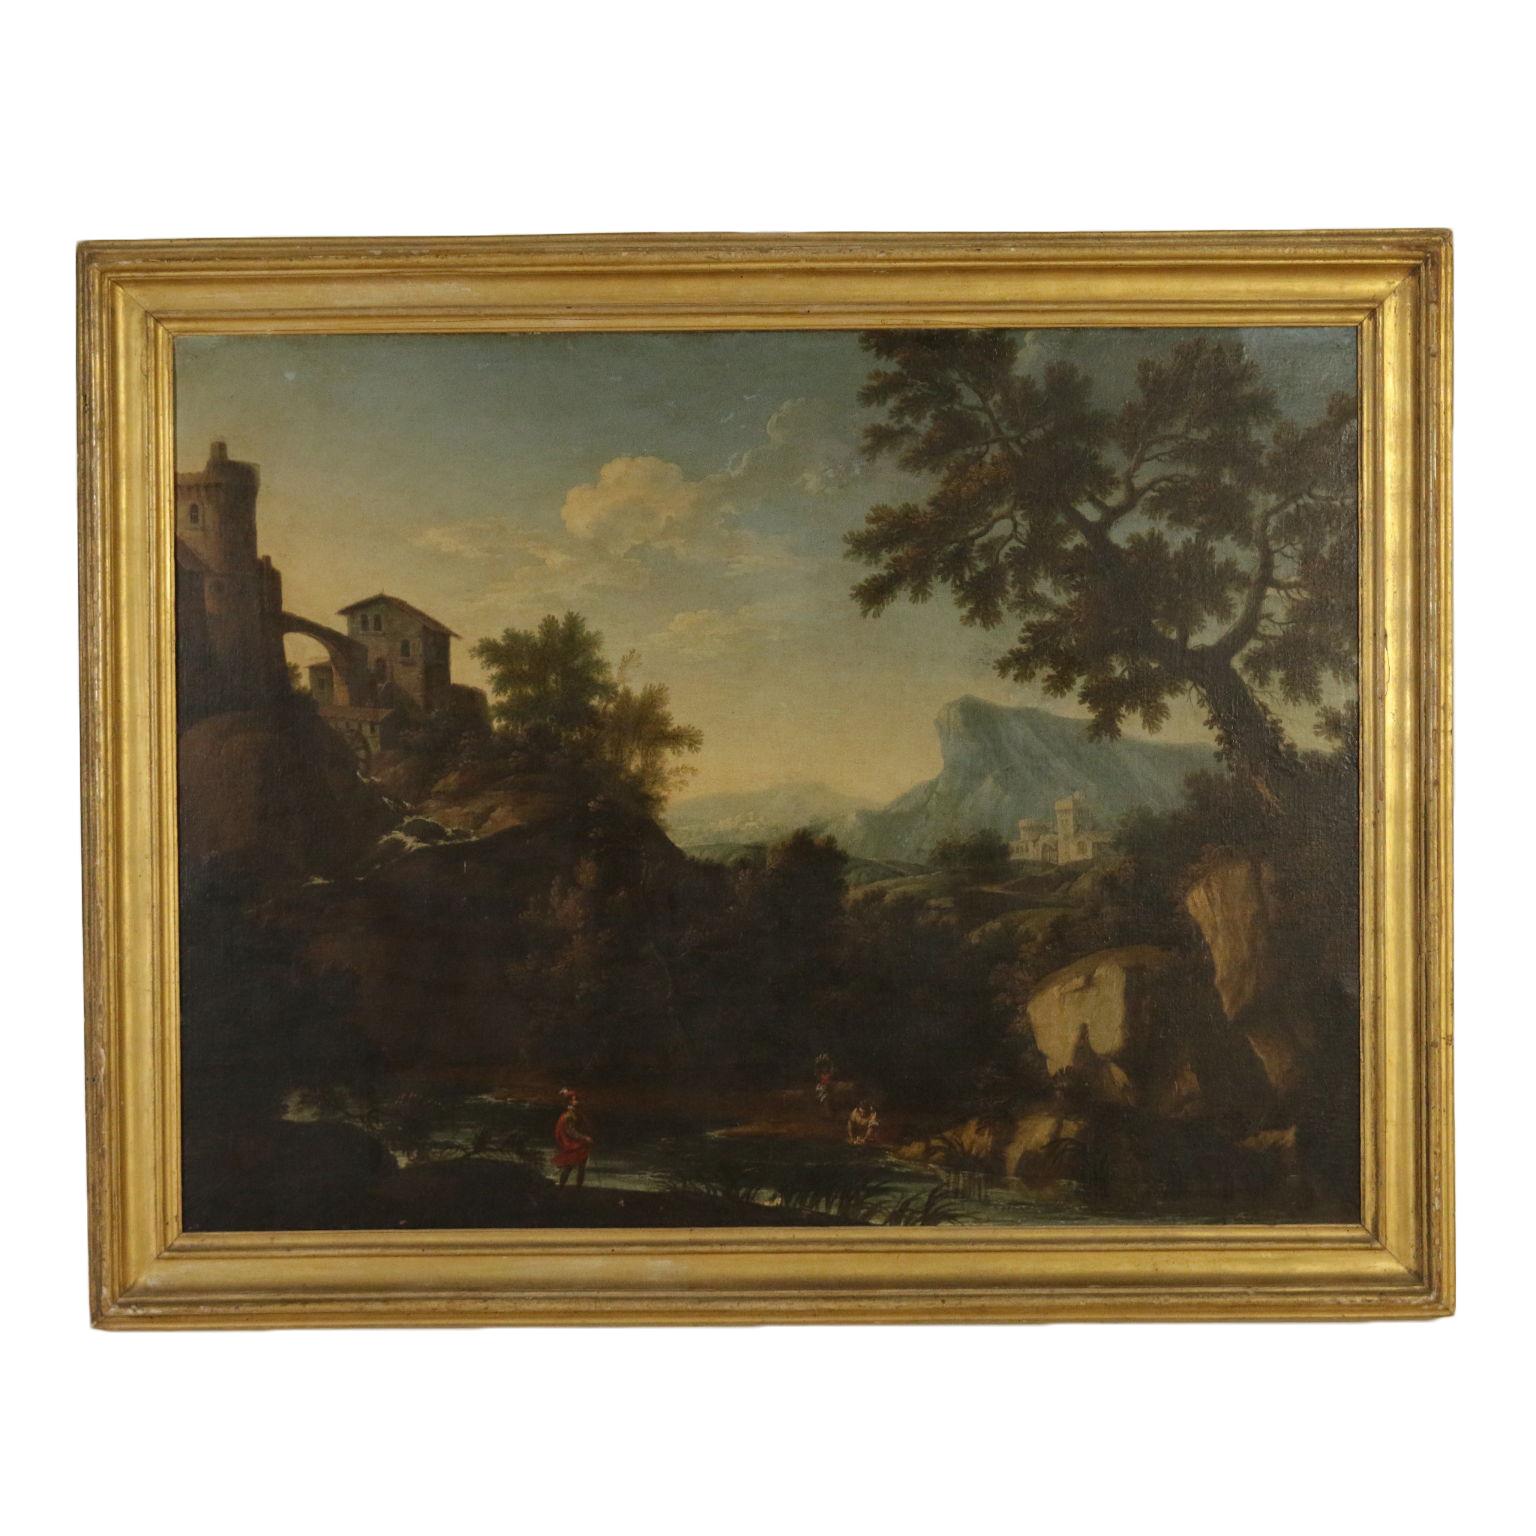 Unknown Landscape Painting - Landscape with Figures and Buildings Oil on Canvas 18th Century